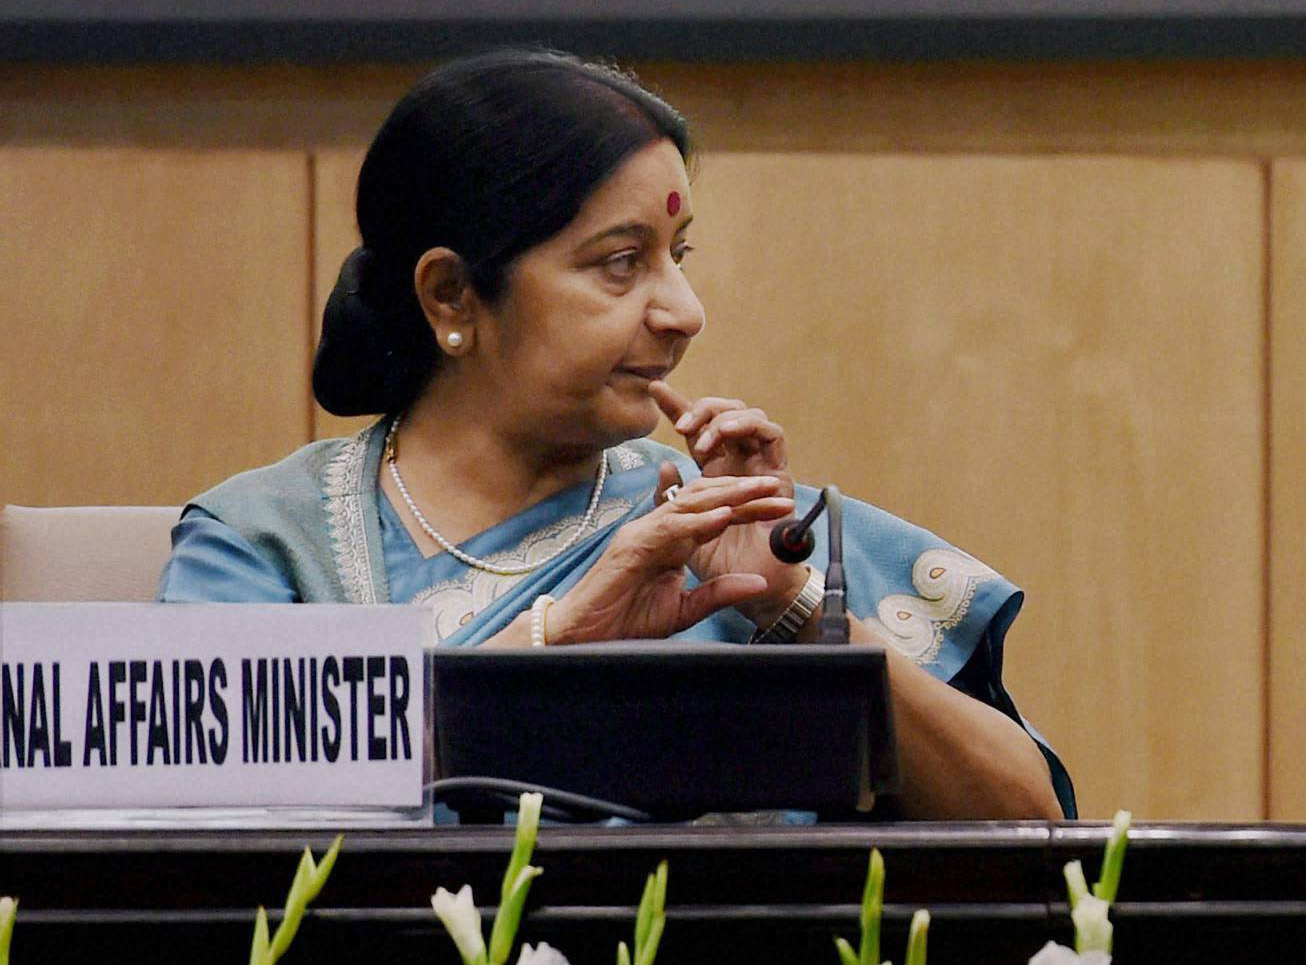 External Affairs Minister Sushma Swaraj in hospital with kidney failure